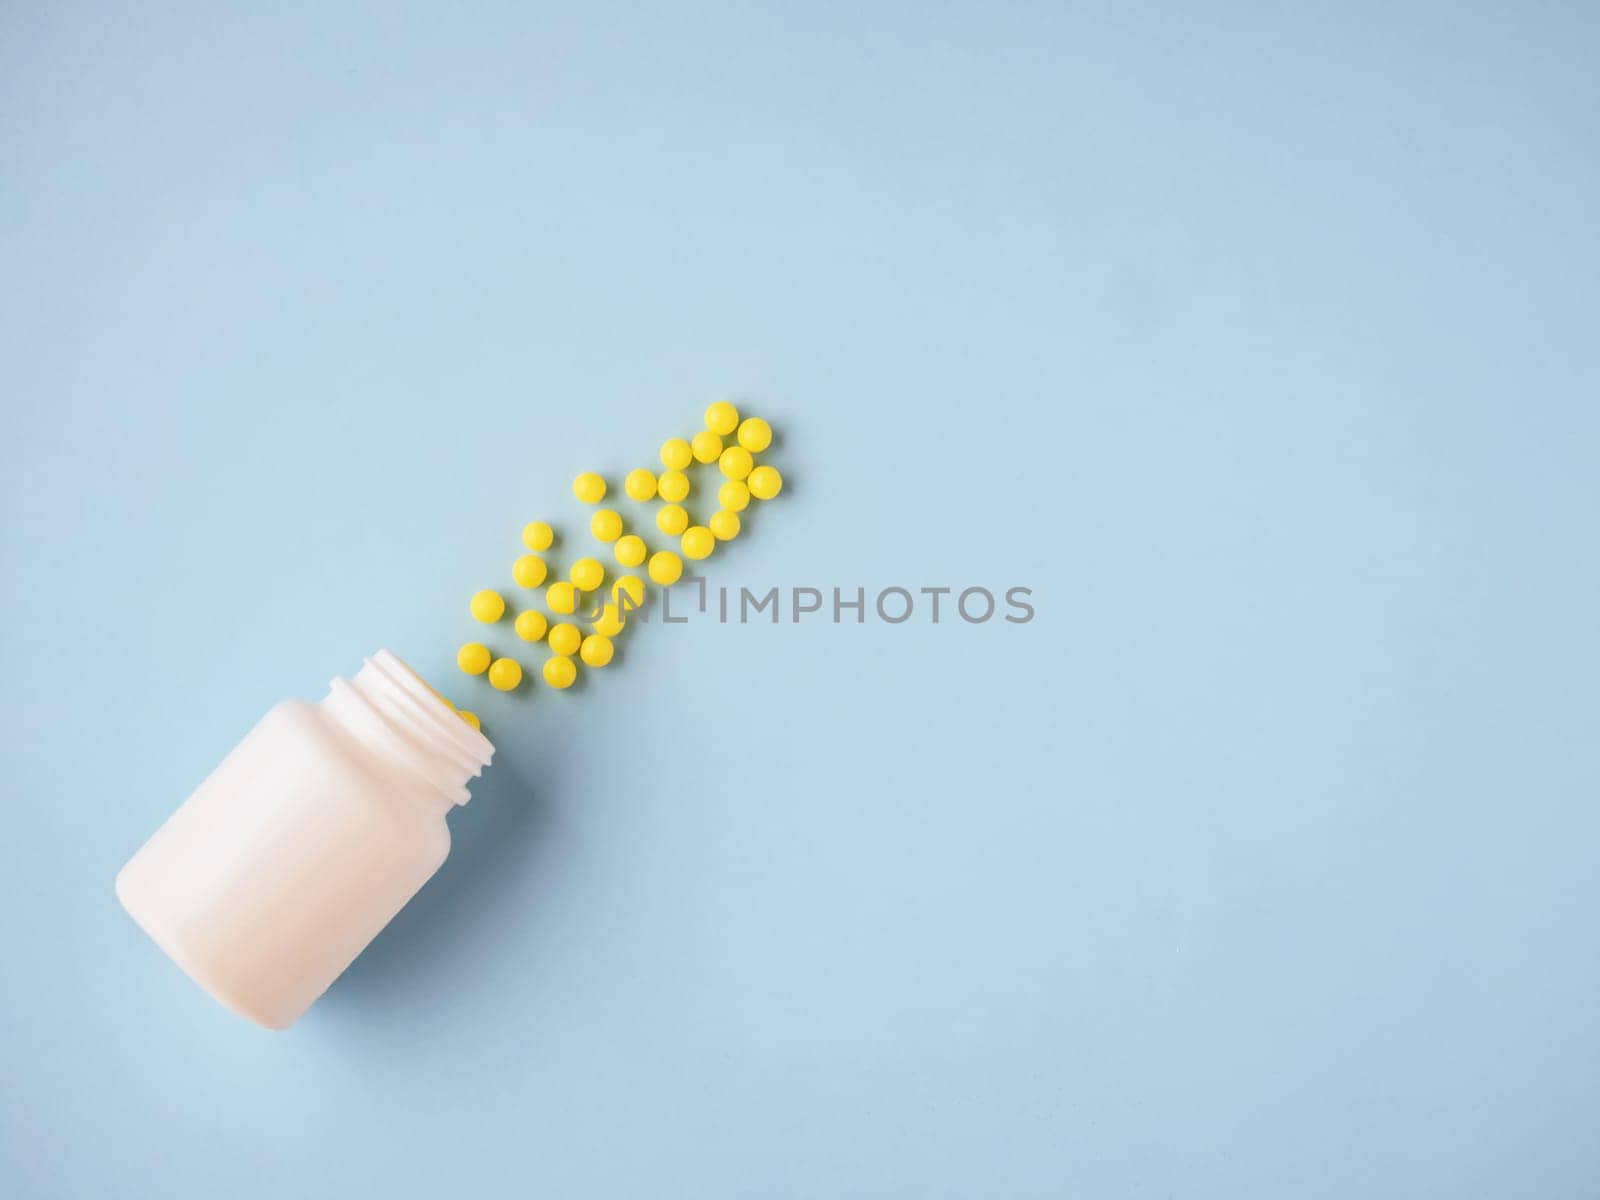 Pharmaceutical and health care concept. Minimalism style template for medical blog. White medicine bottle and small round yellow pills spilled out blue paper background. Medicine pills. Flat lay